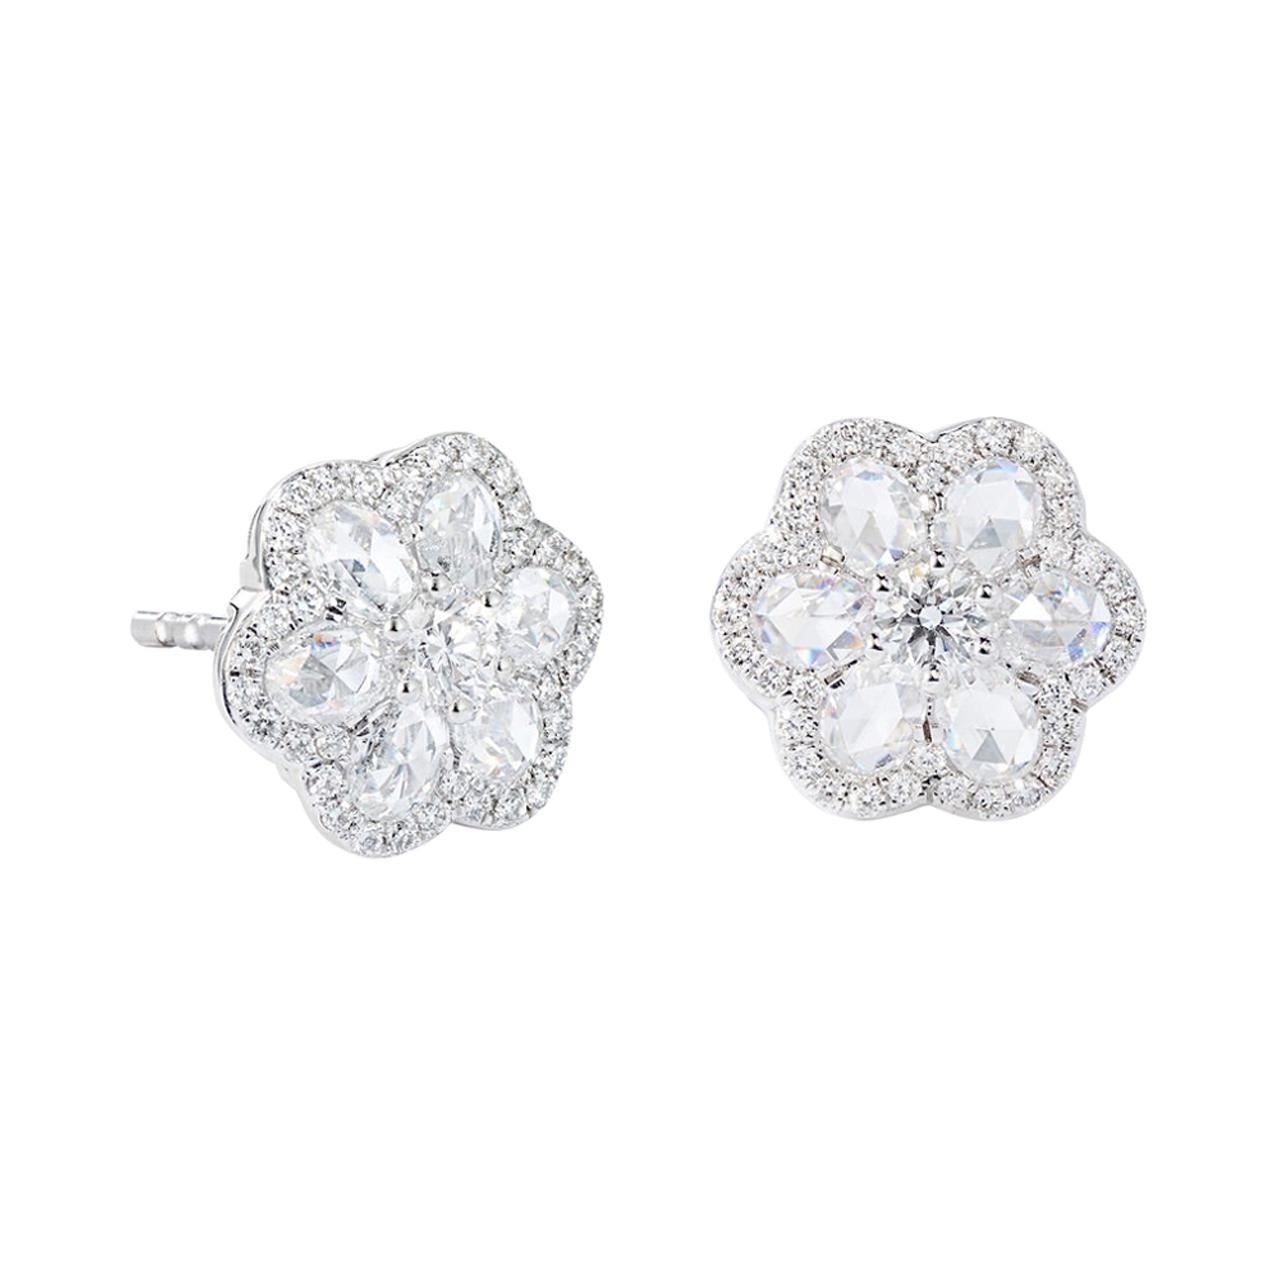 64Facets 1 Carat Flower Shaped Rose Cut Diamond Stud Earrings in White Gold For Sale